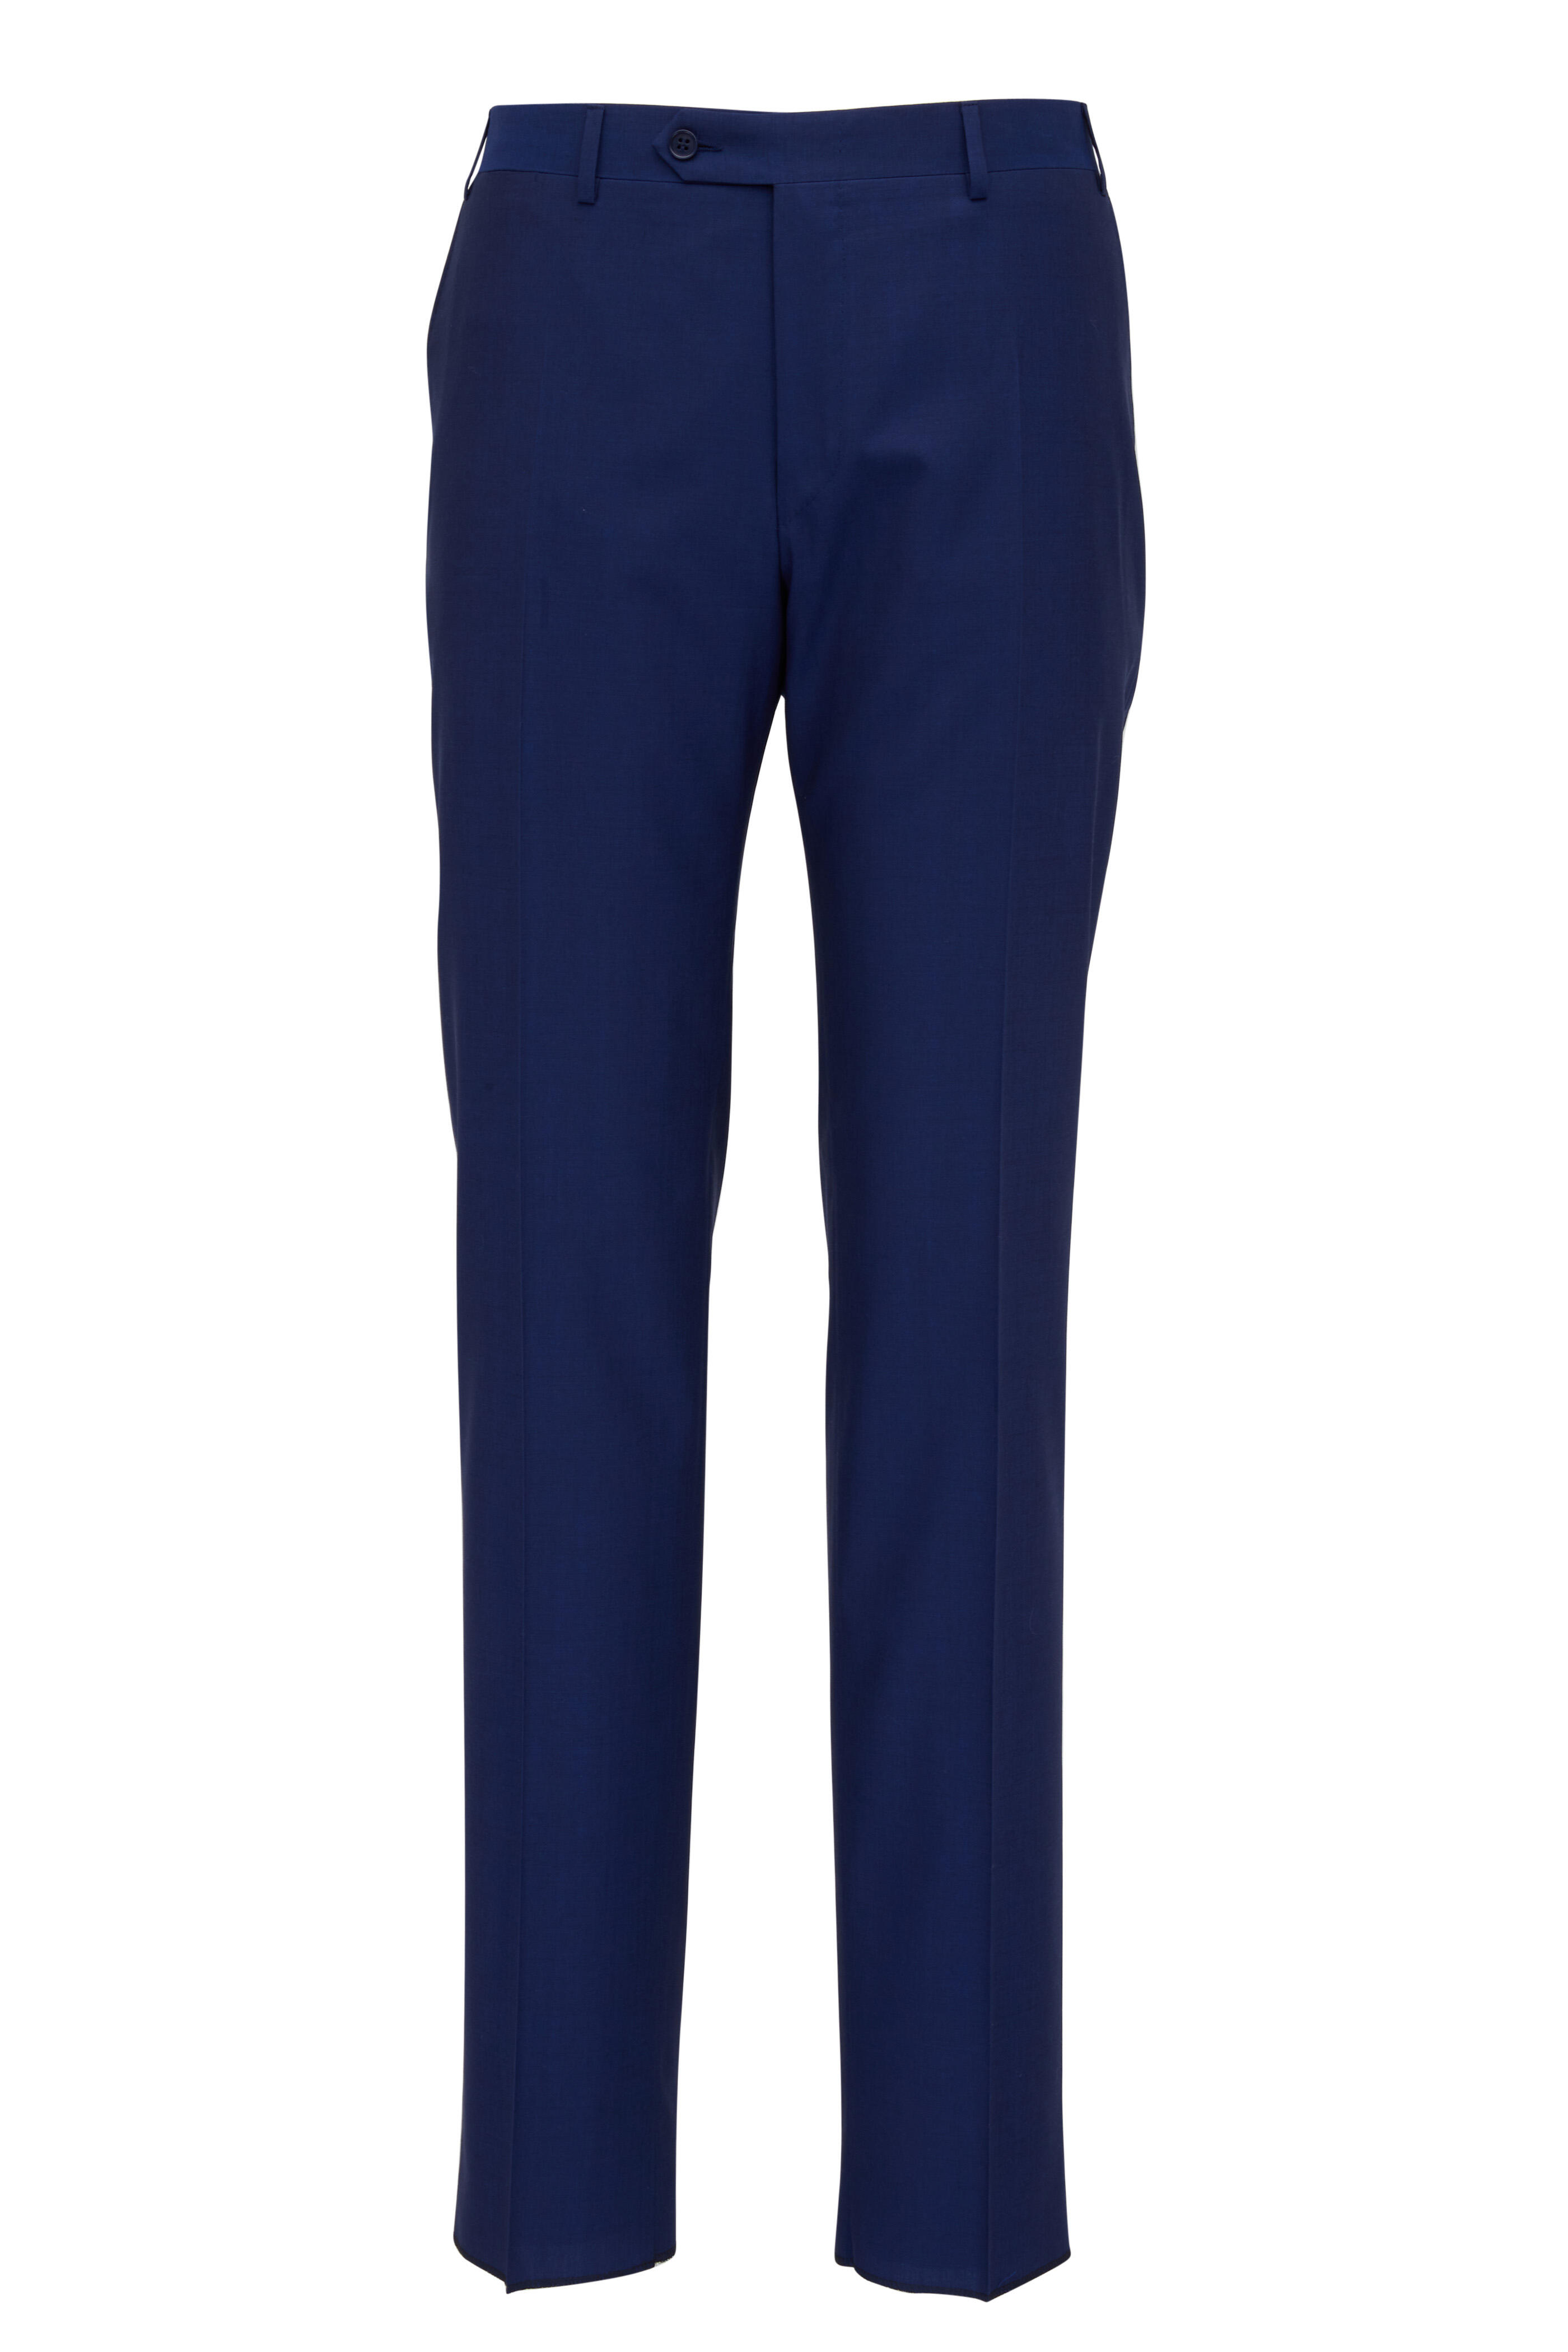 Canali - Bright Blue Tropical Wool Travel Suit | Mitchell Stores